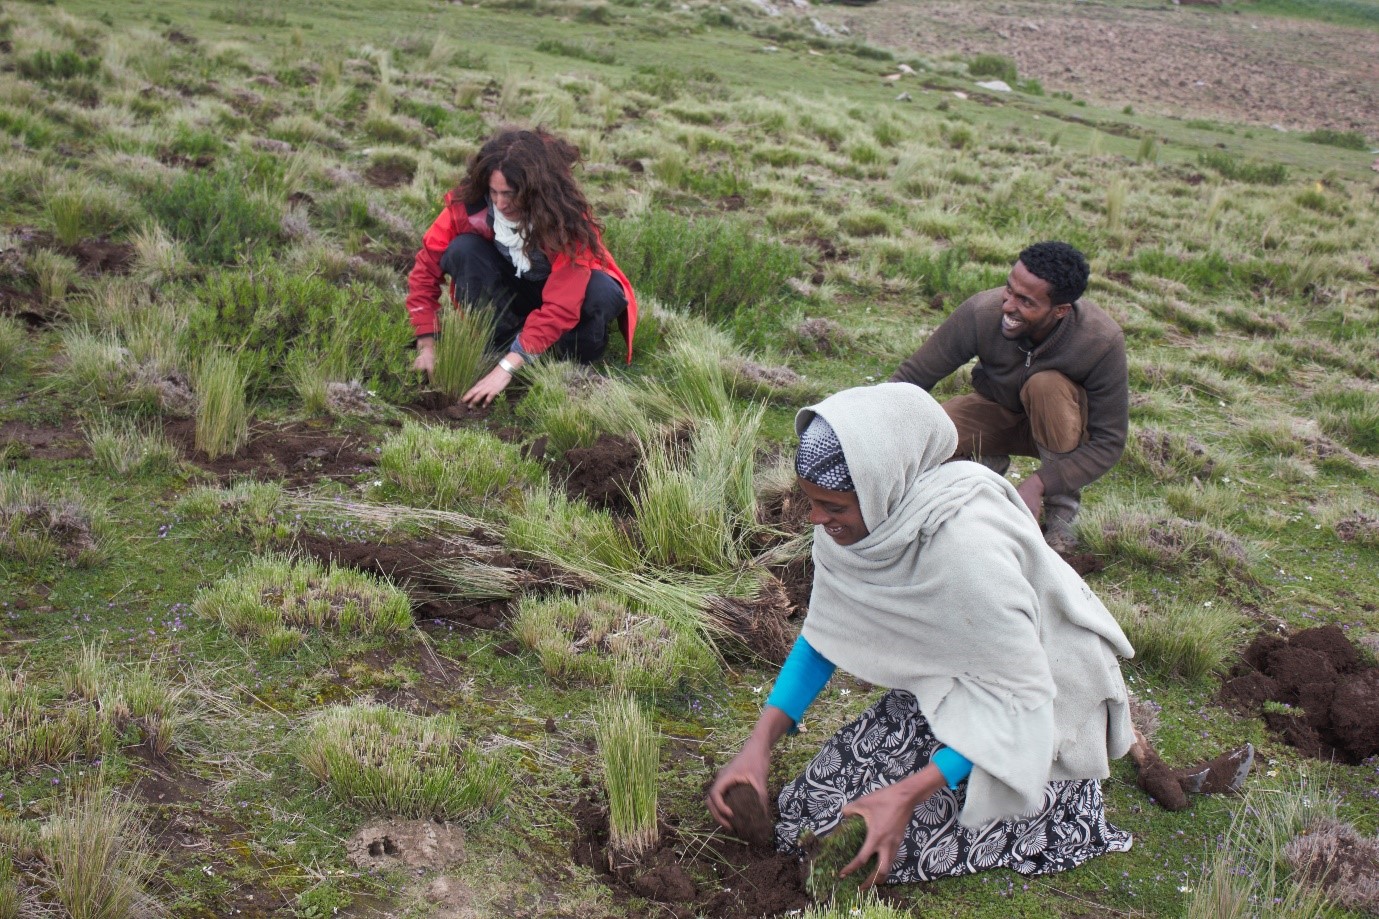 Three people crouch on a grassy hillside planting seedlings